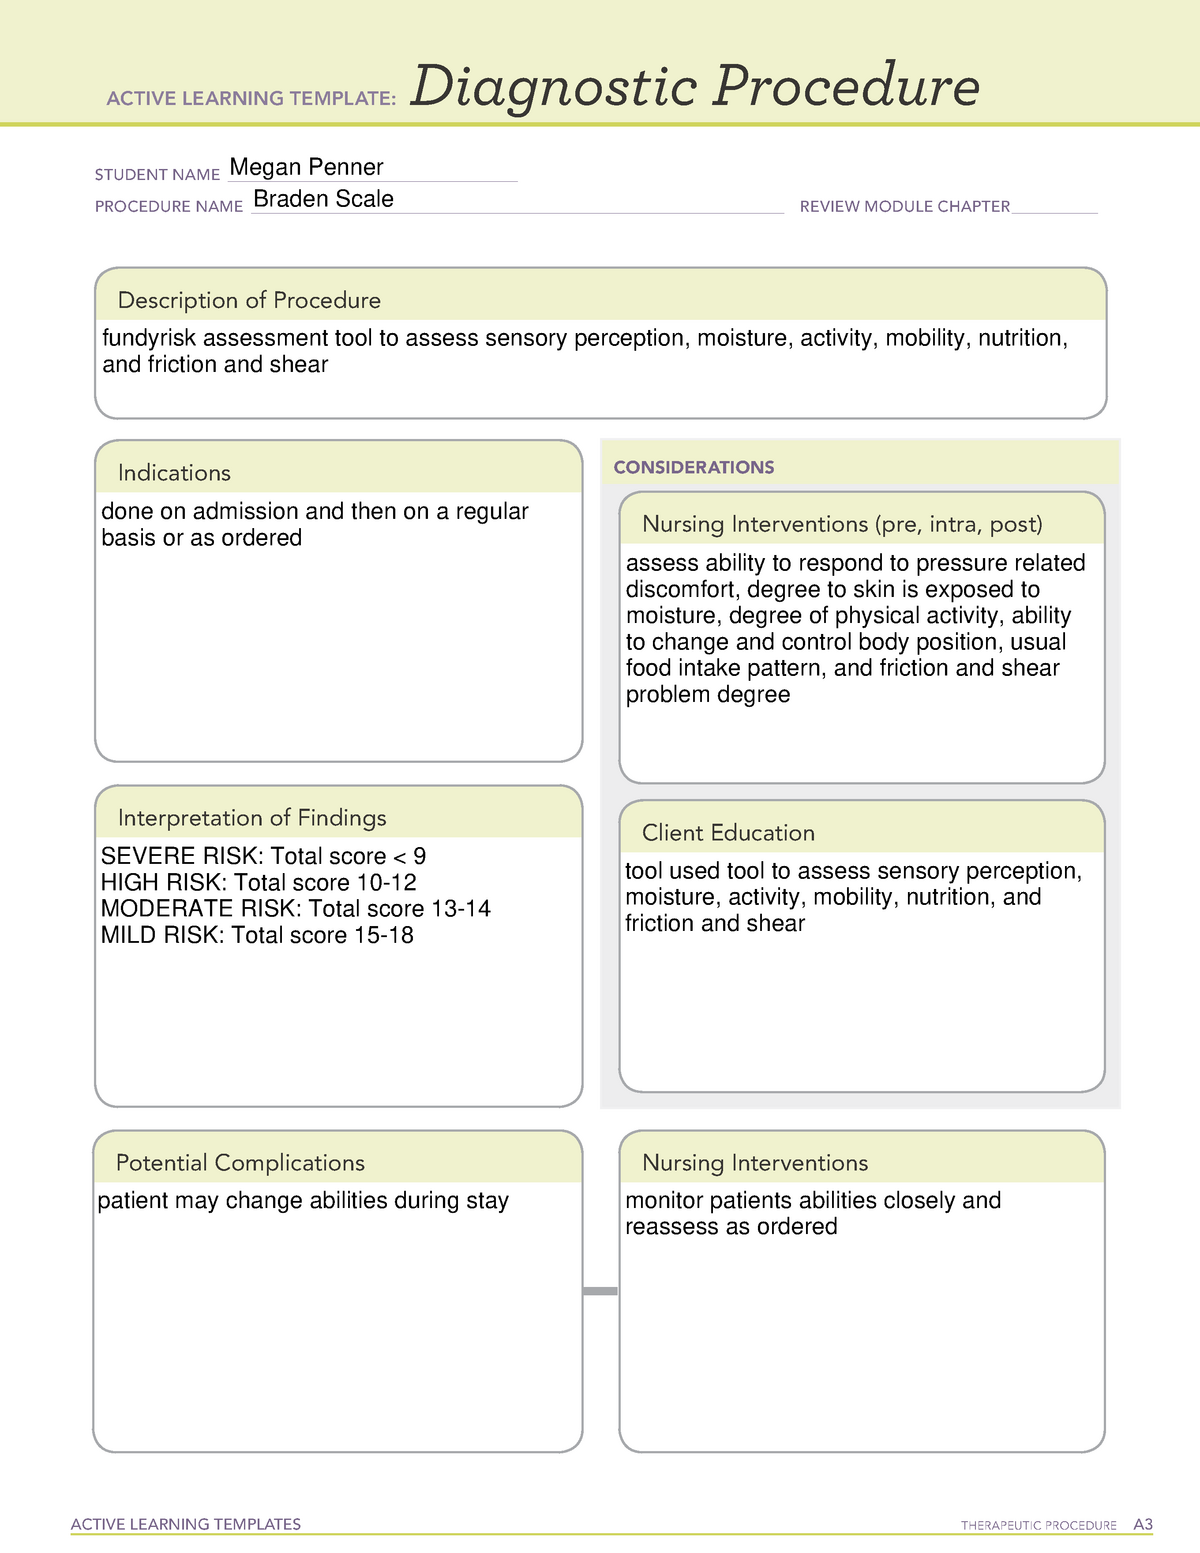 active-learning-template-diagnostic-procedure-form-braden-active-learning-templates